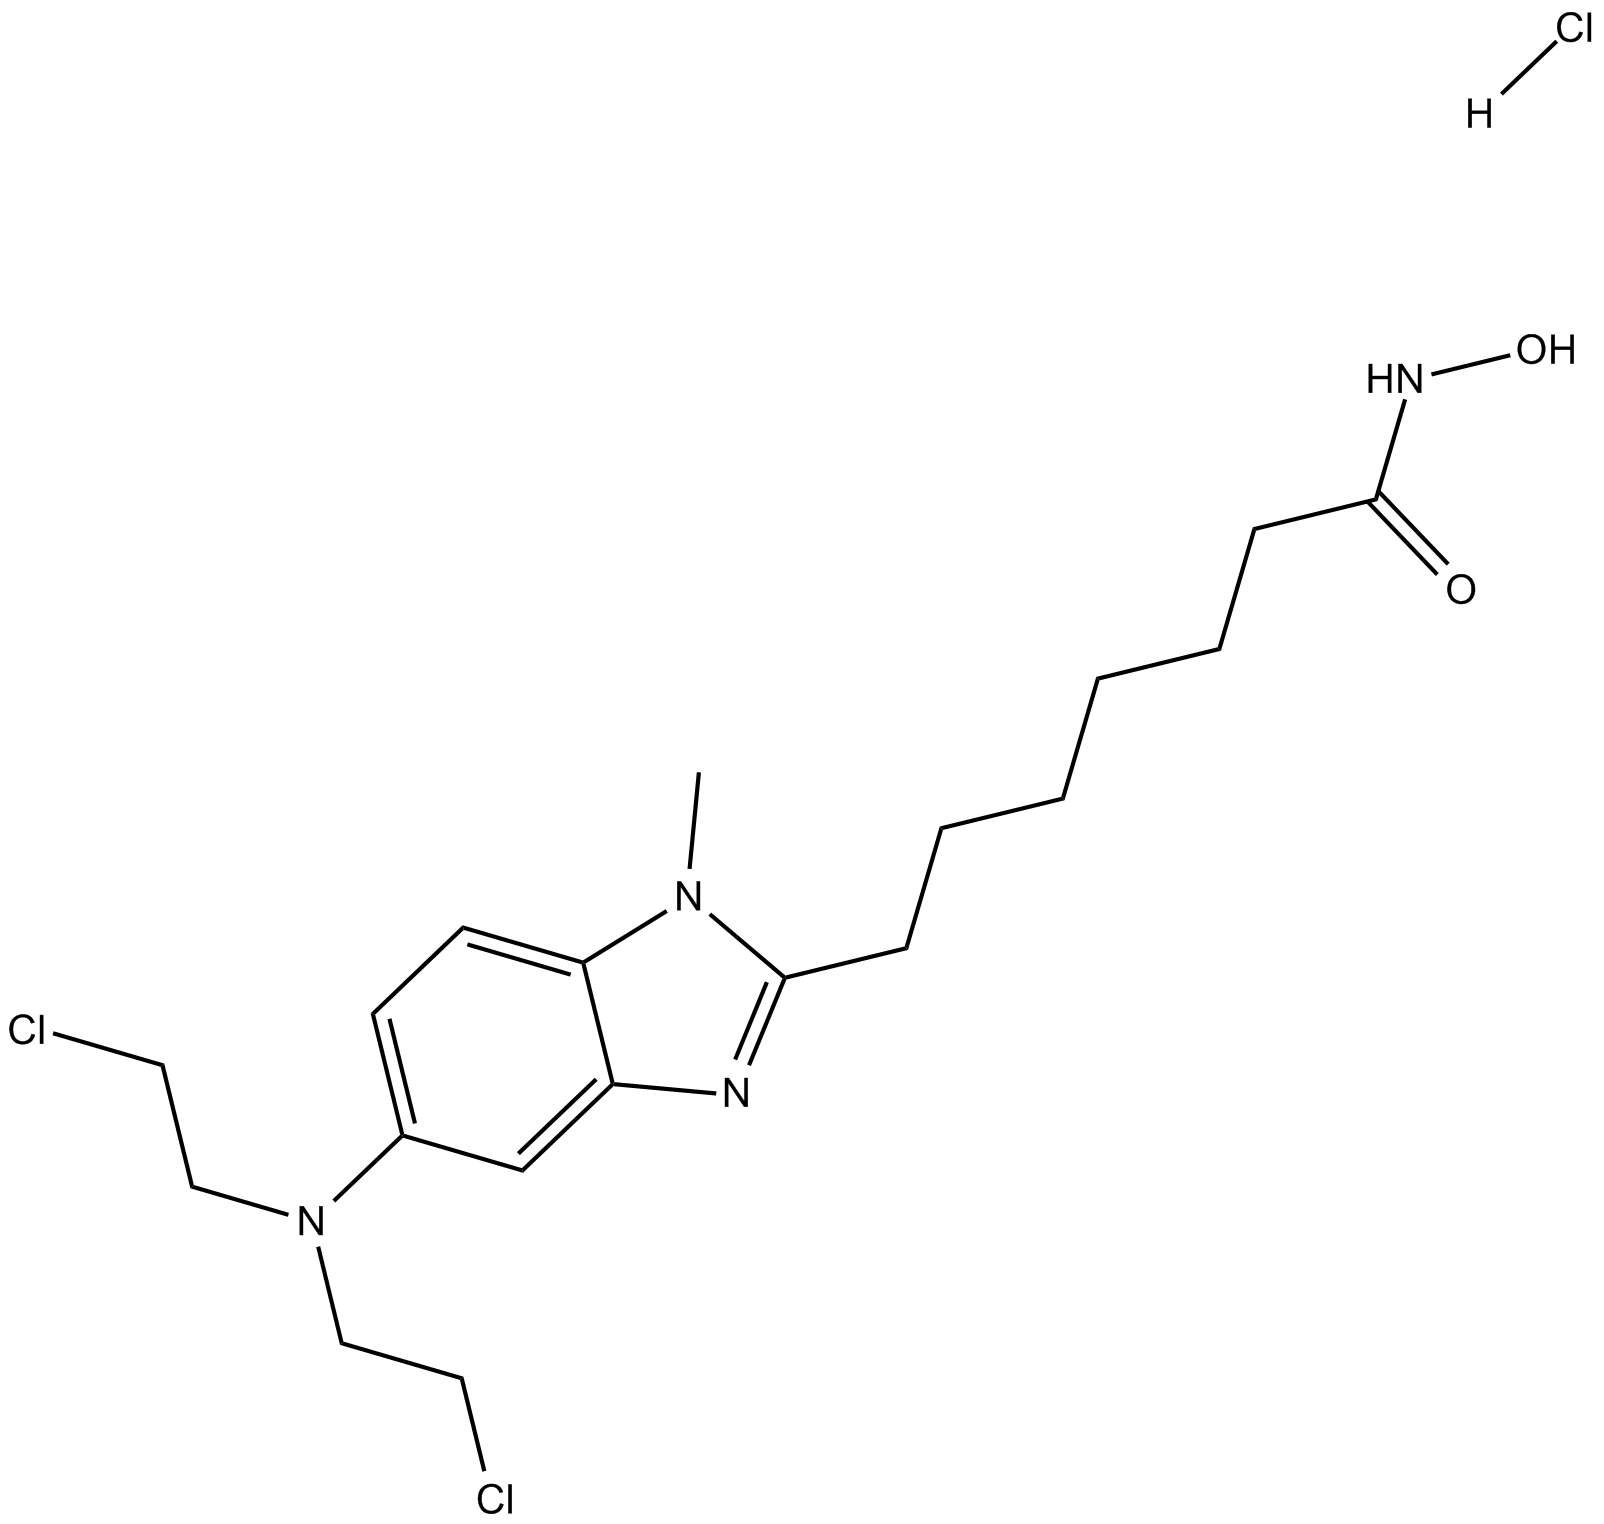 Tinostamustine HCl   Chemical Structure